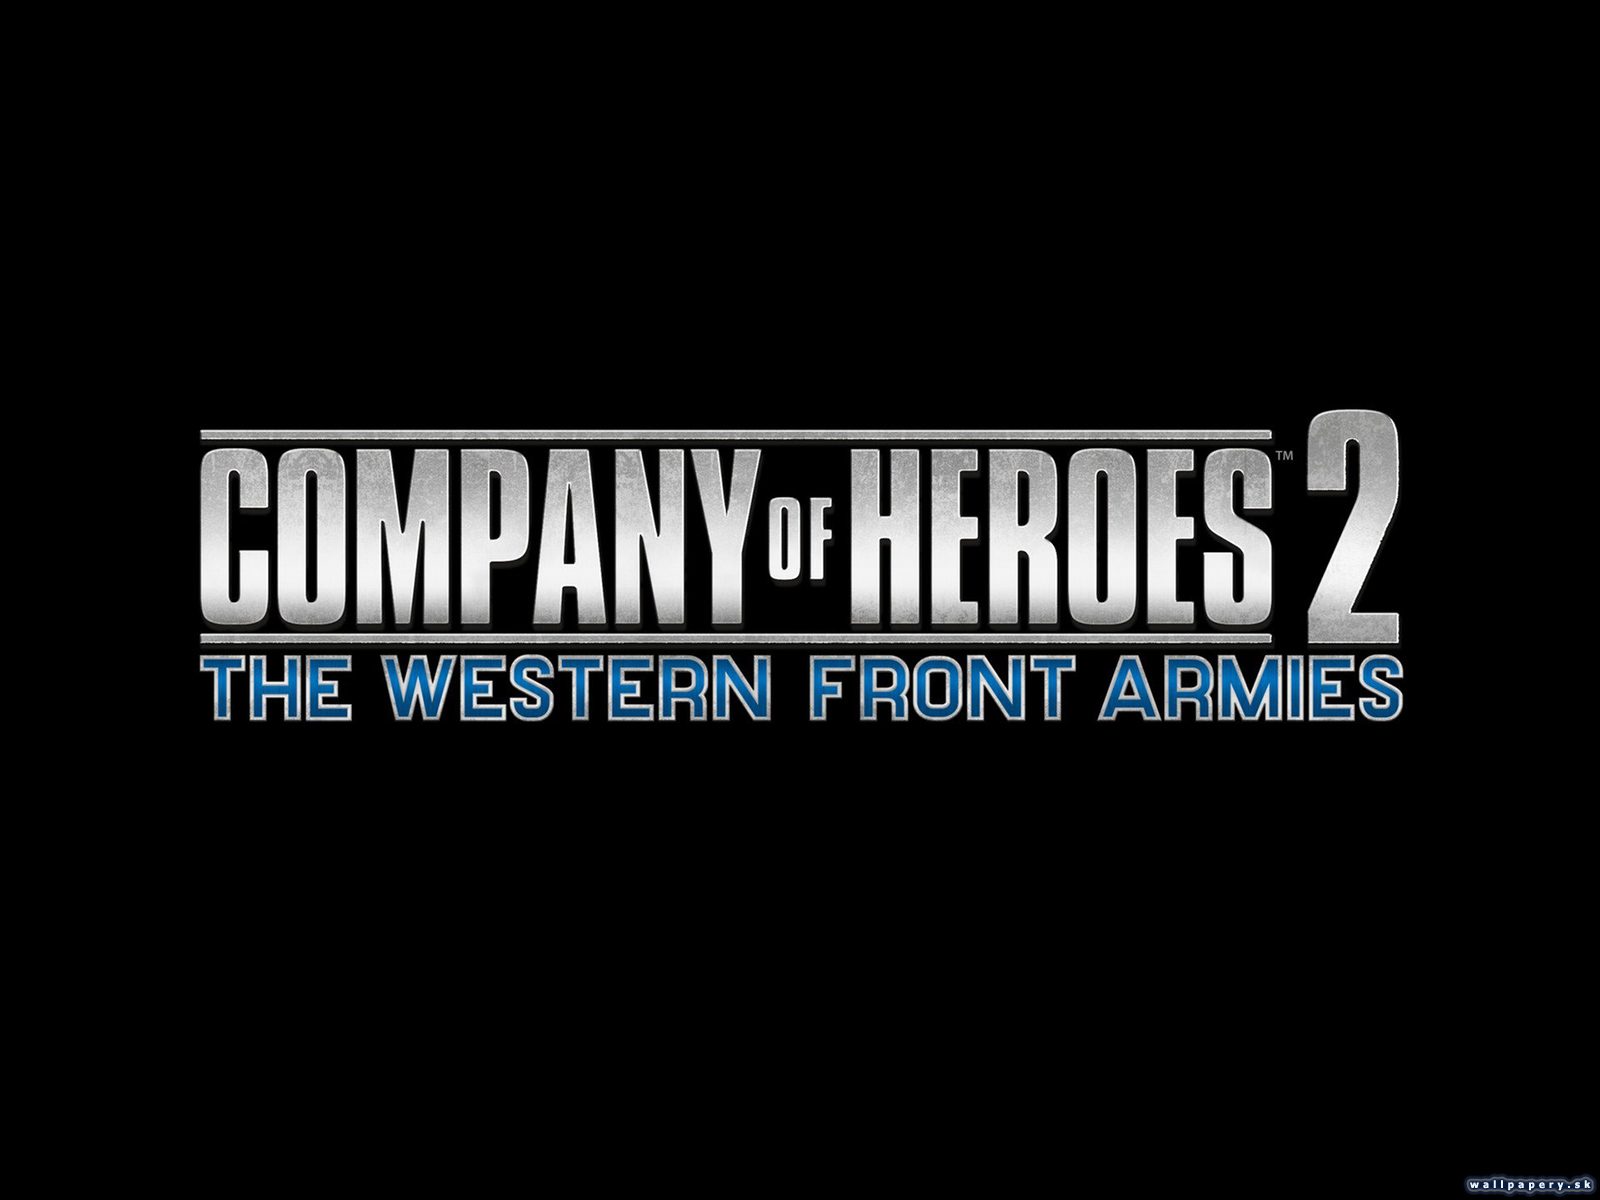 Company of Heroes 2: The Western Front Armies - wallpaper 4